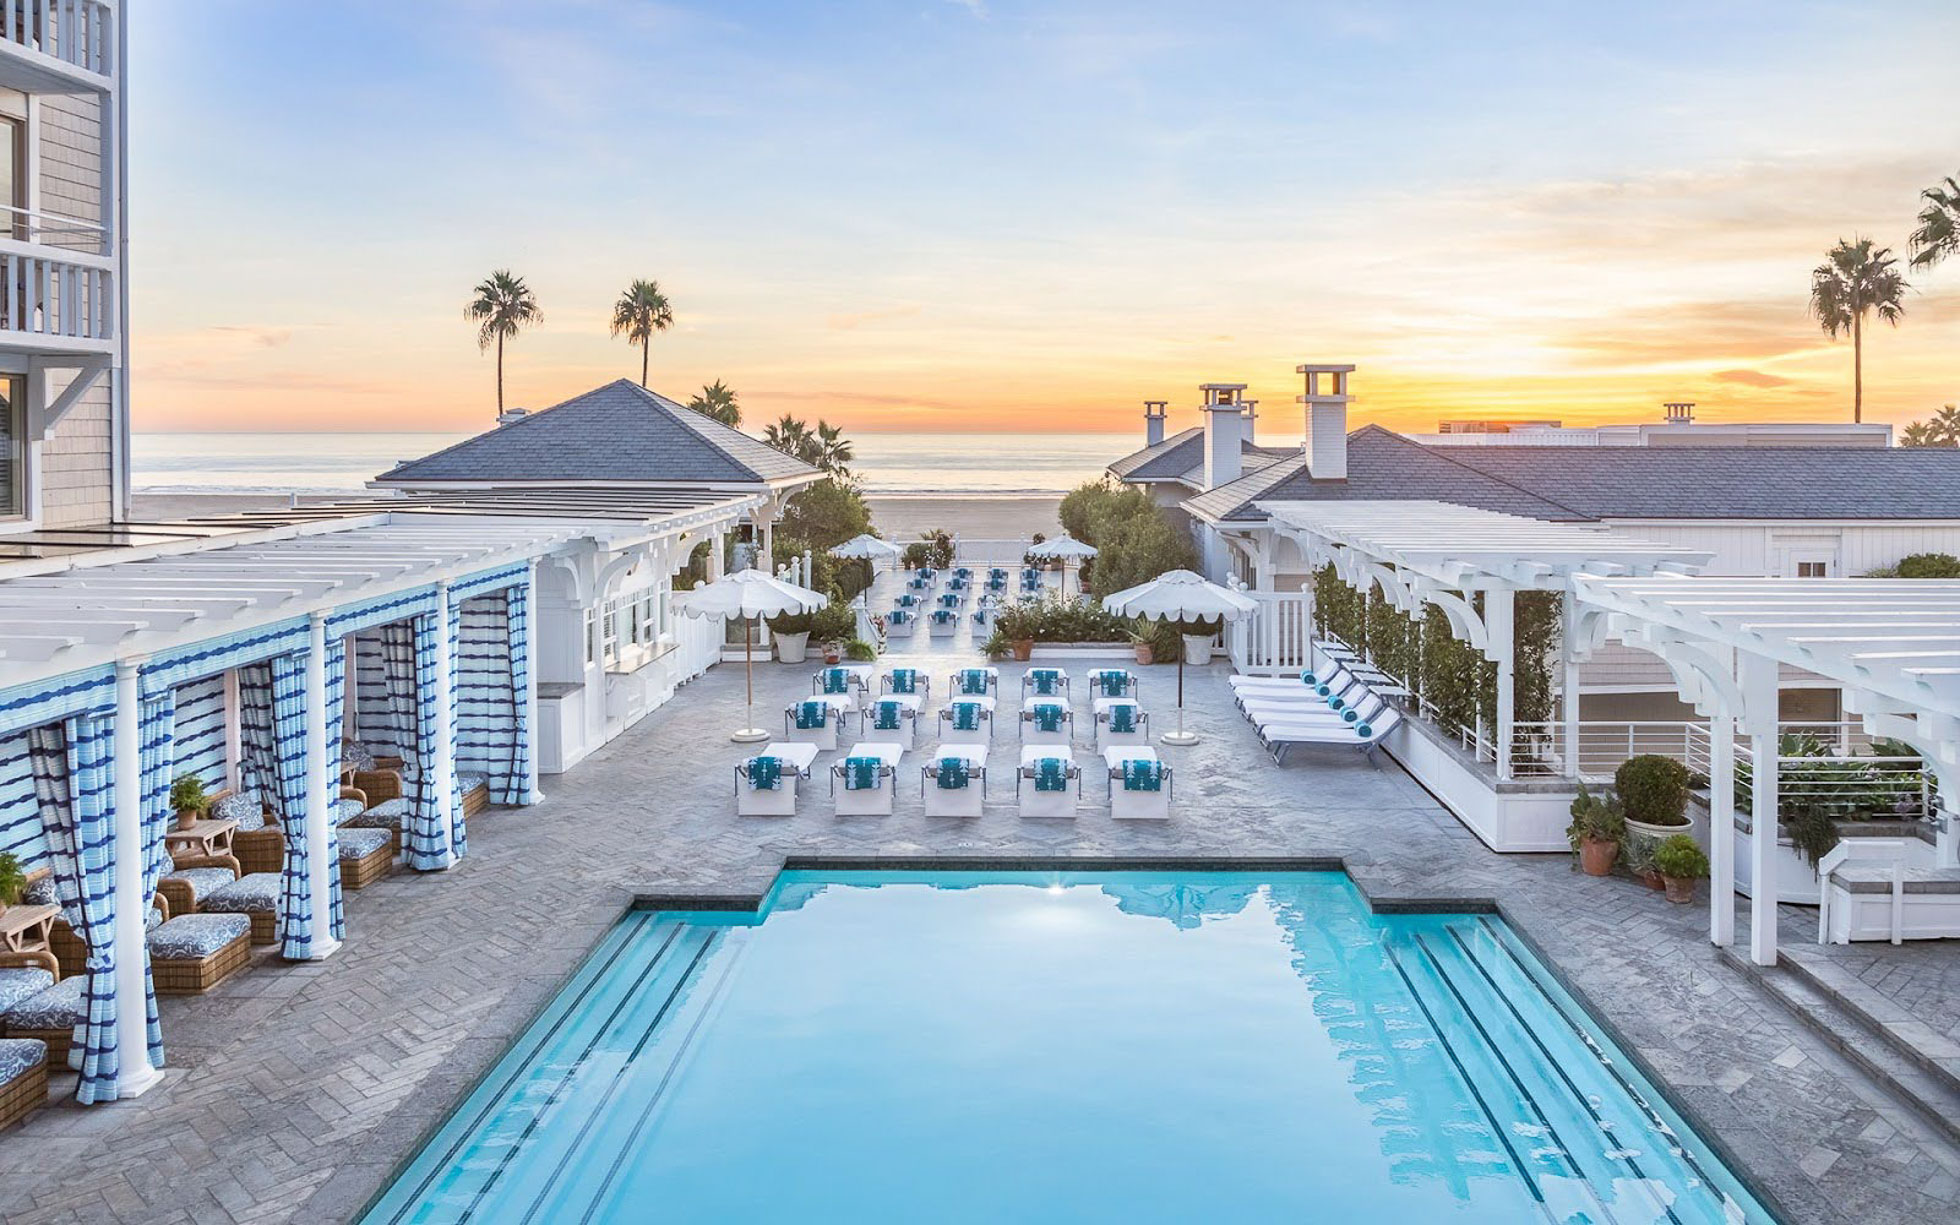 Luxurious Southern California beach resort pool area, an idyllic setting for bridal parties seeking on-site hair and makeup services.